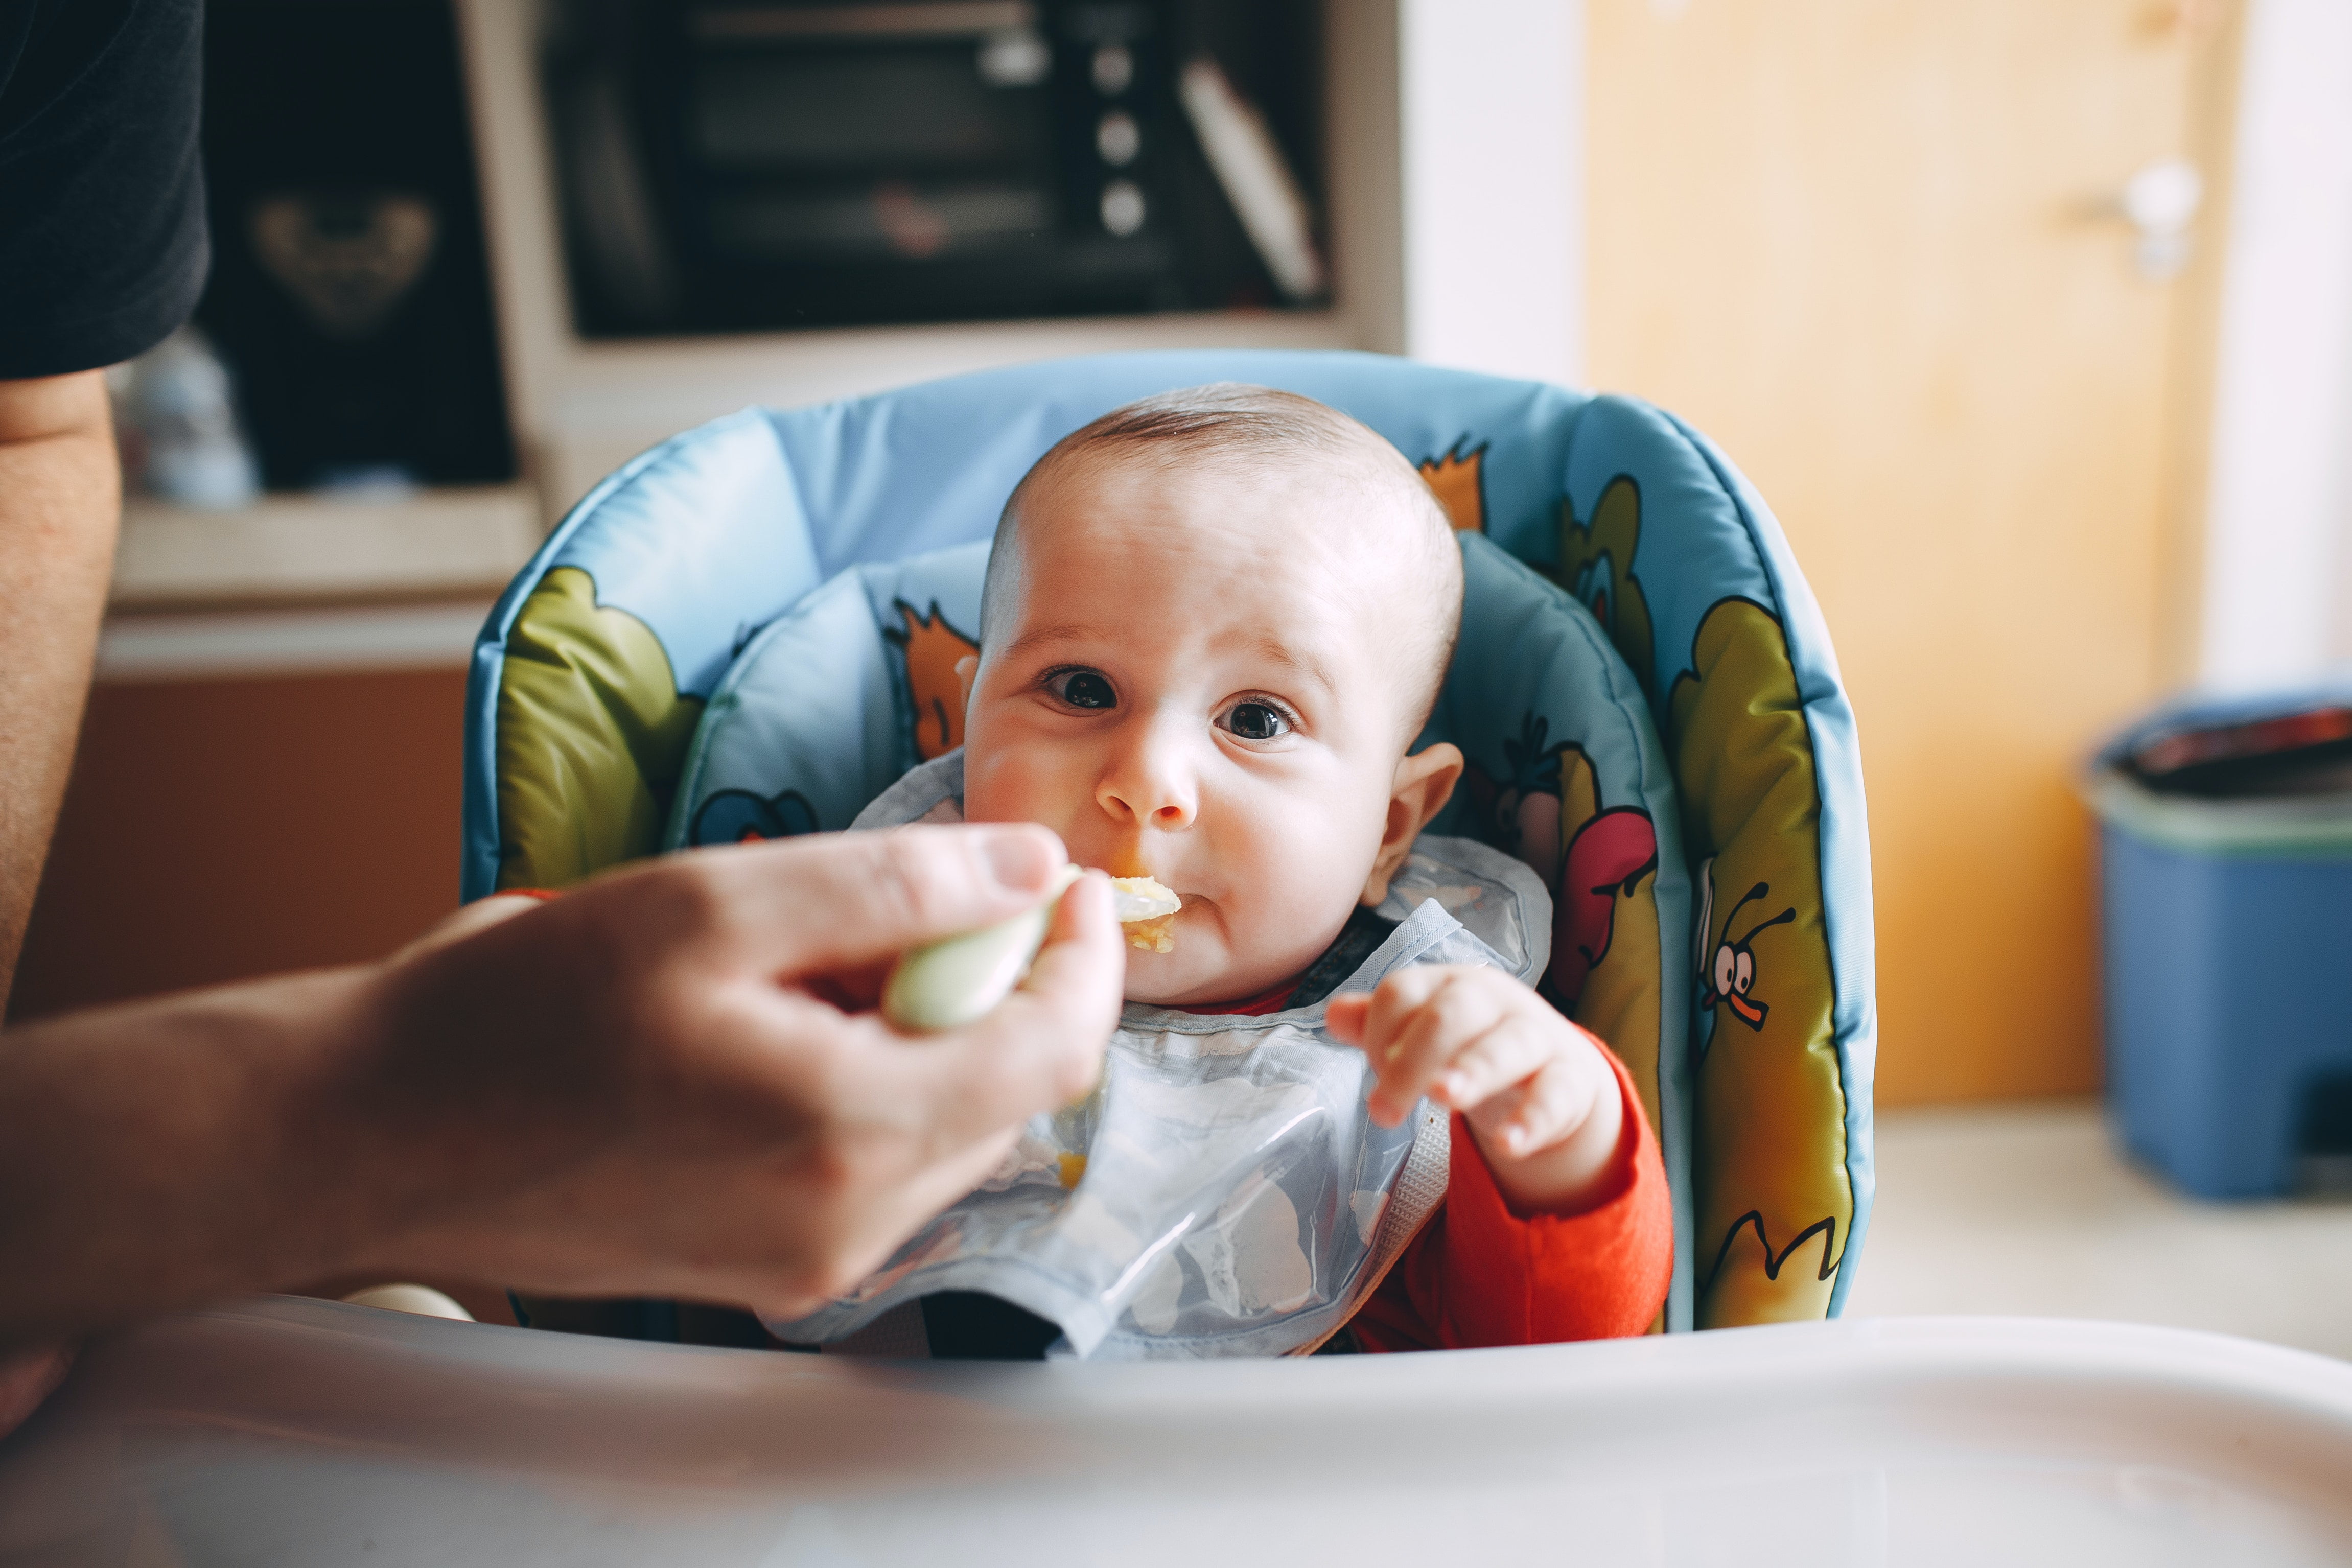 Cute and Practical Baby Bib for Mealtime Messes